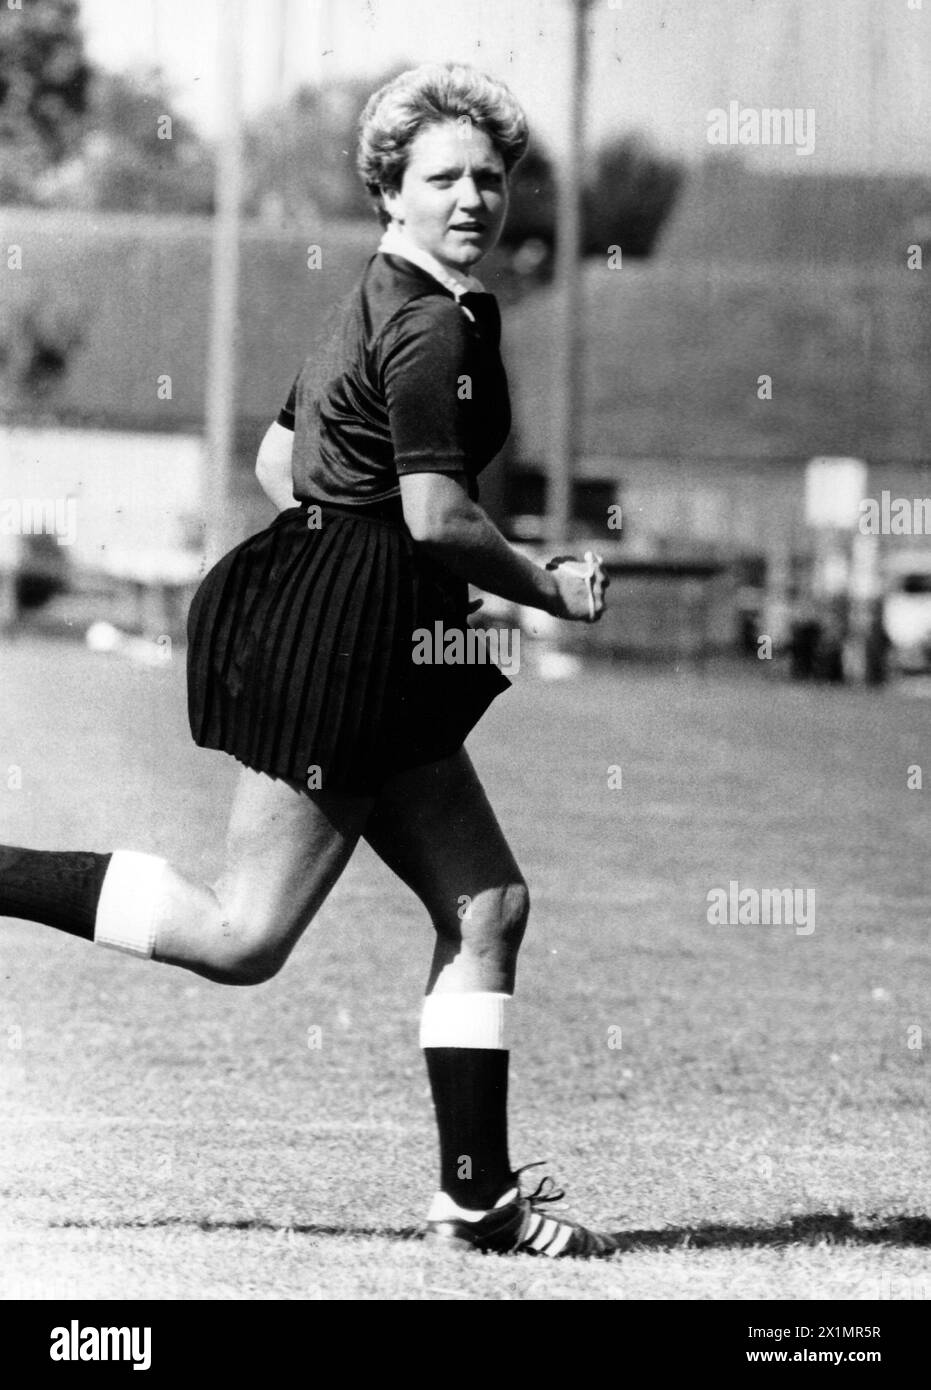 F.A. CUP REFEREE KIM GEORGE FROM BOGNOR, 1988 PIC MIKE WALKER 1988 Stock Photo